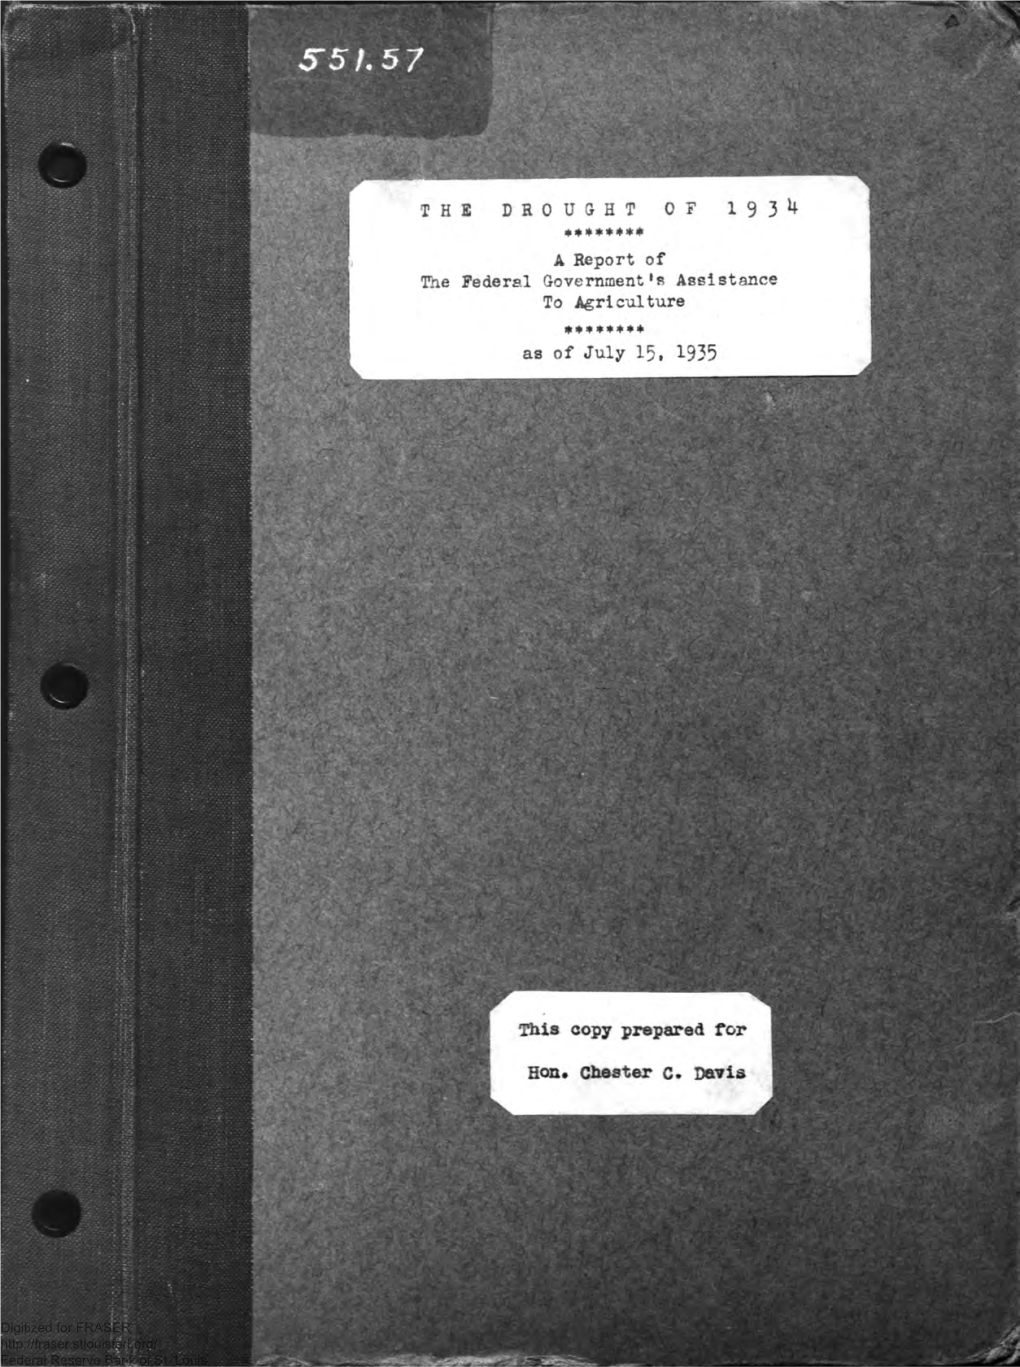 Drought of 1934: a Report of the Federal Government's Assistance to Agriculture, As of July 15, 1935